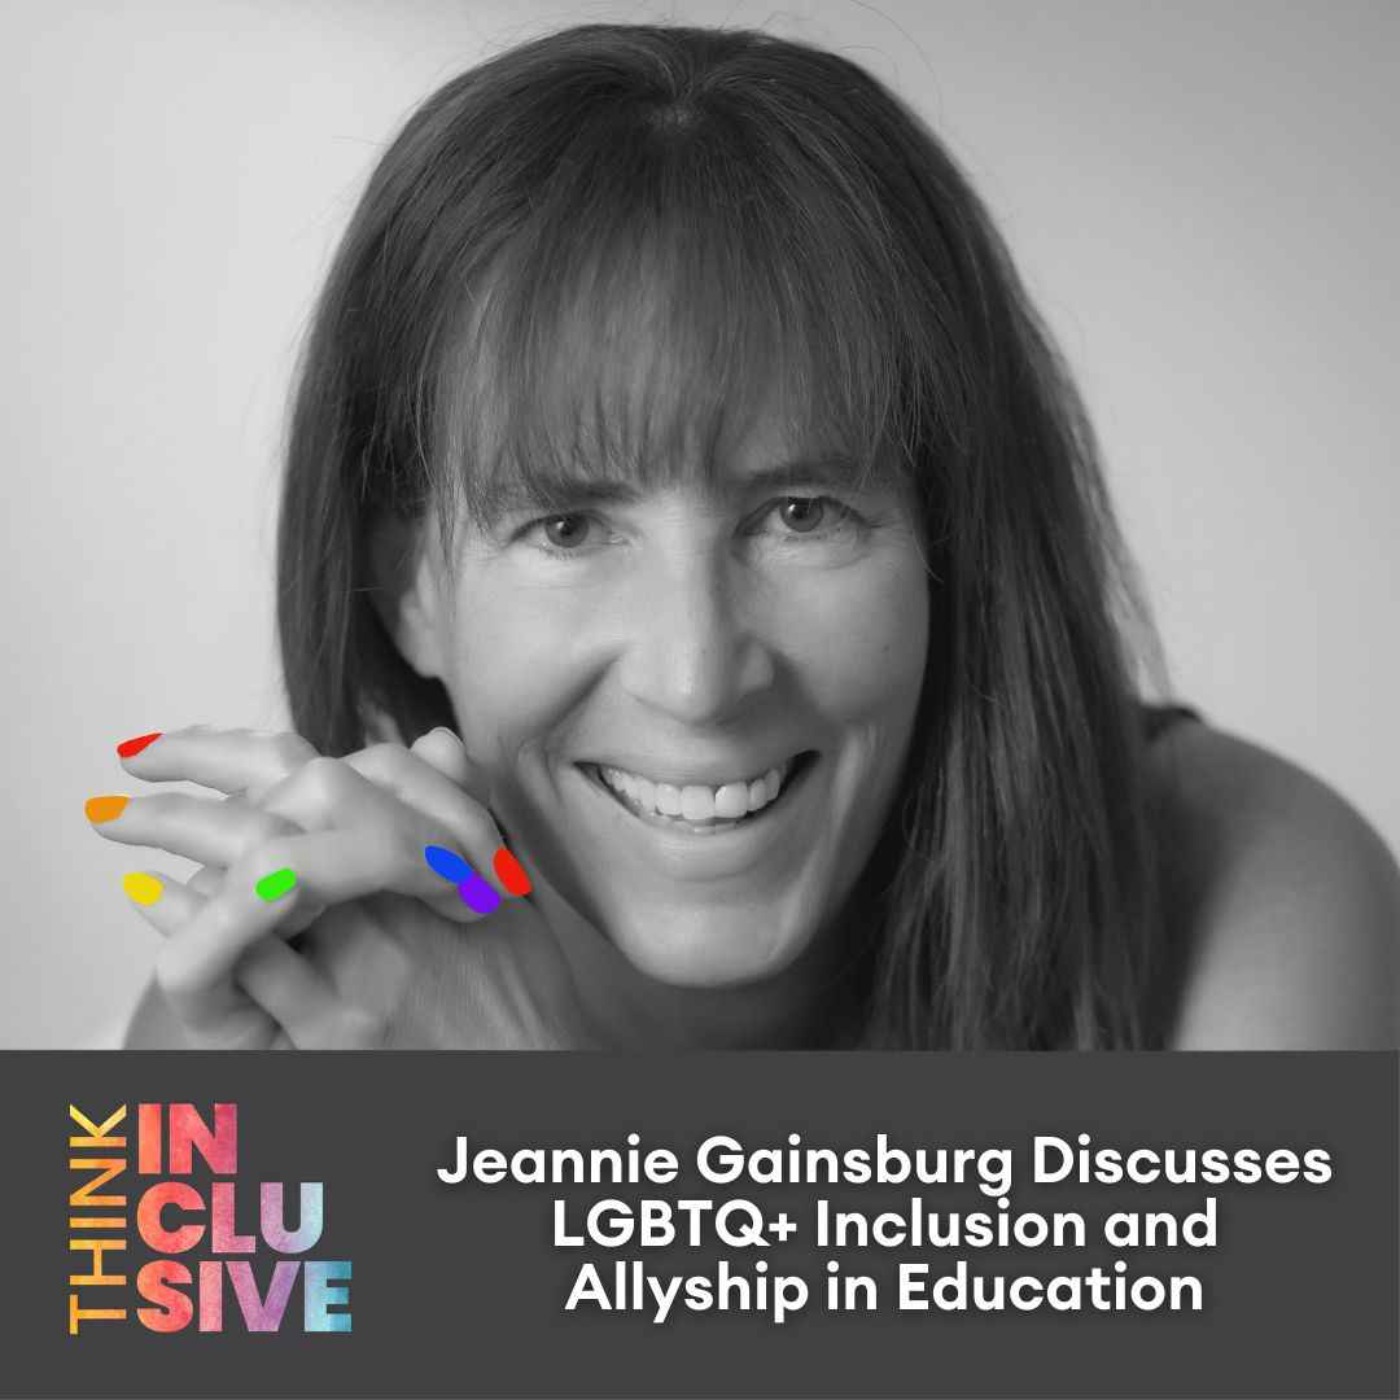 Jeannie Gainsburg Discusses LGBTQ+ Inclusion and Allyship in Education